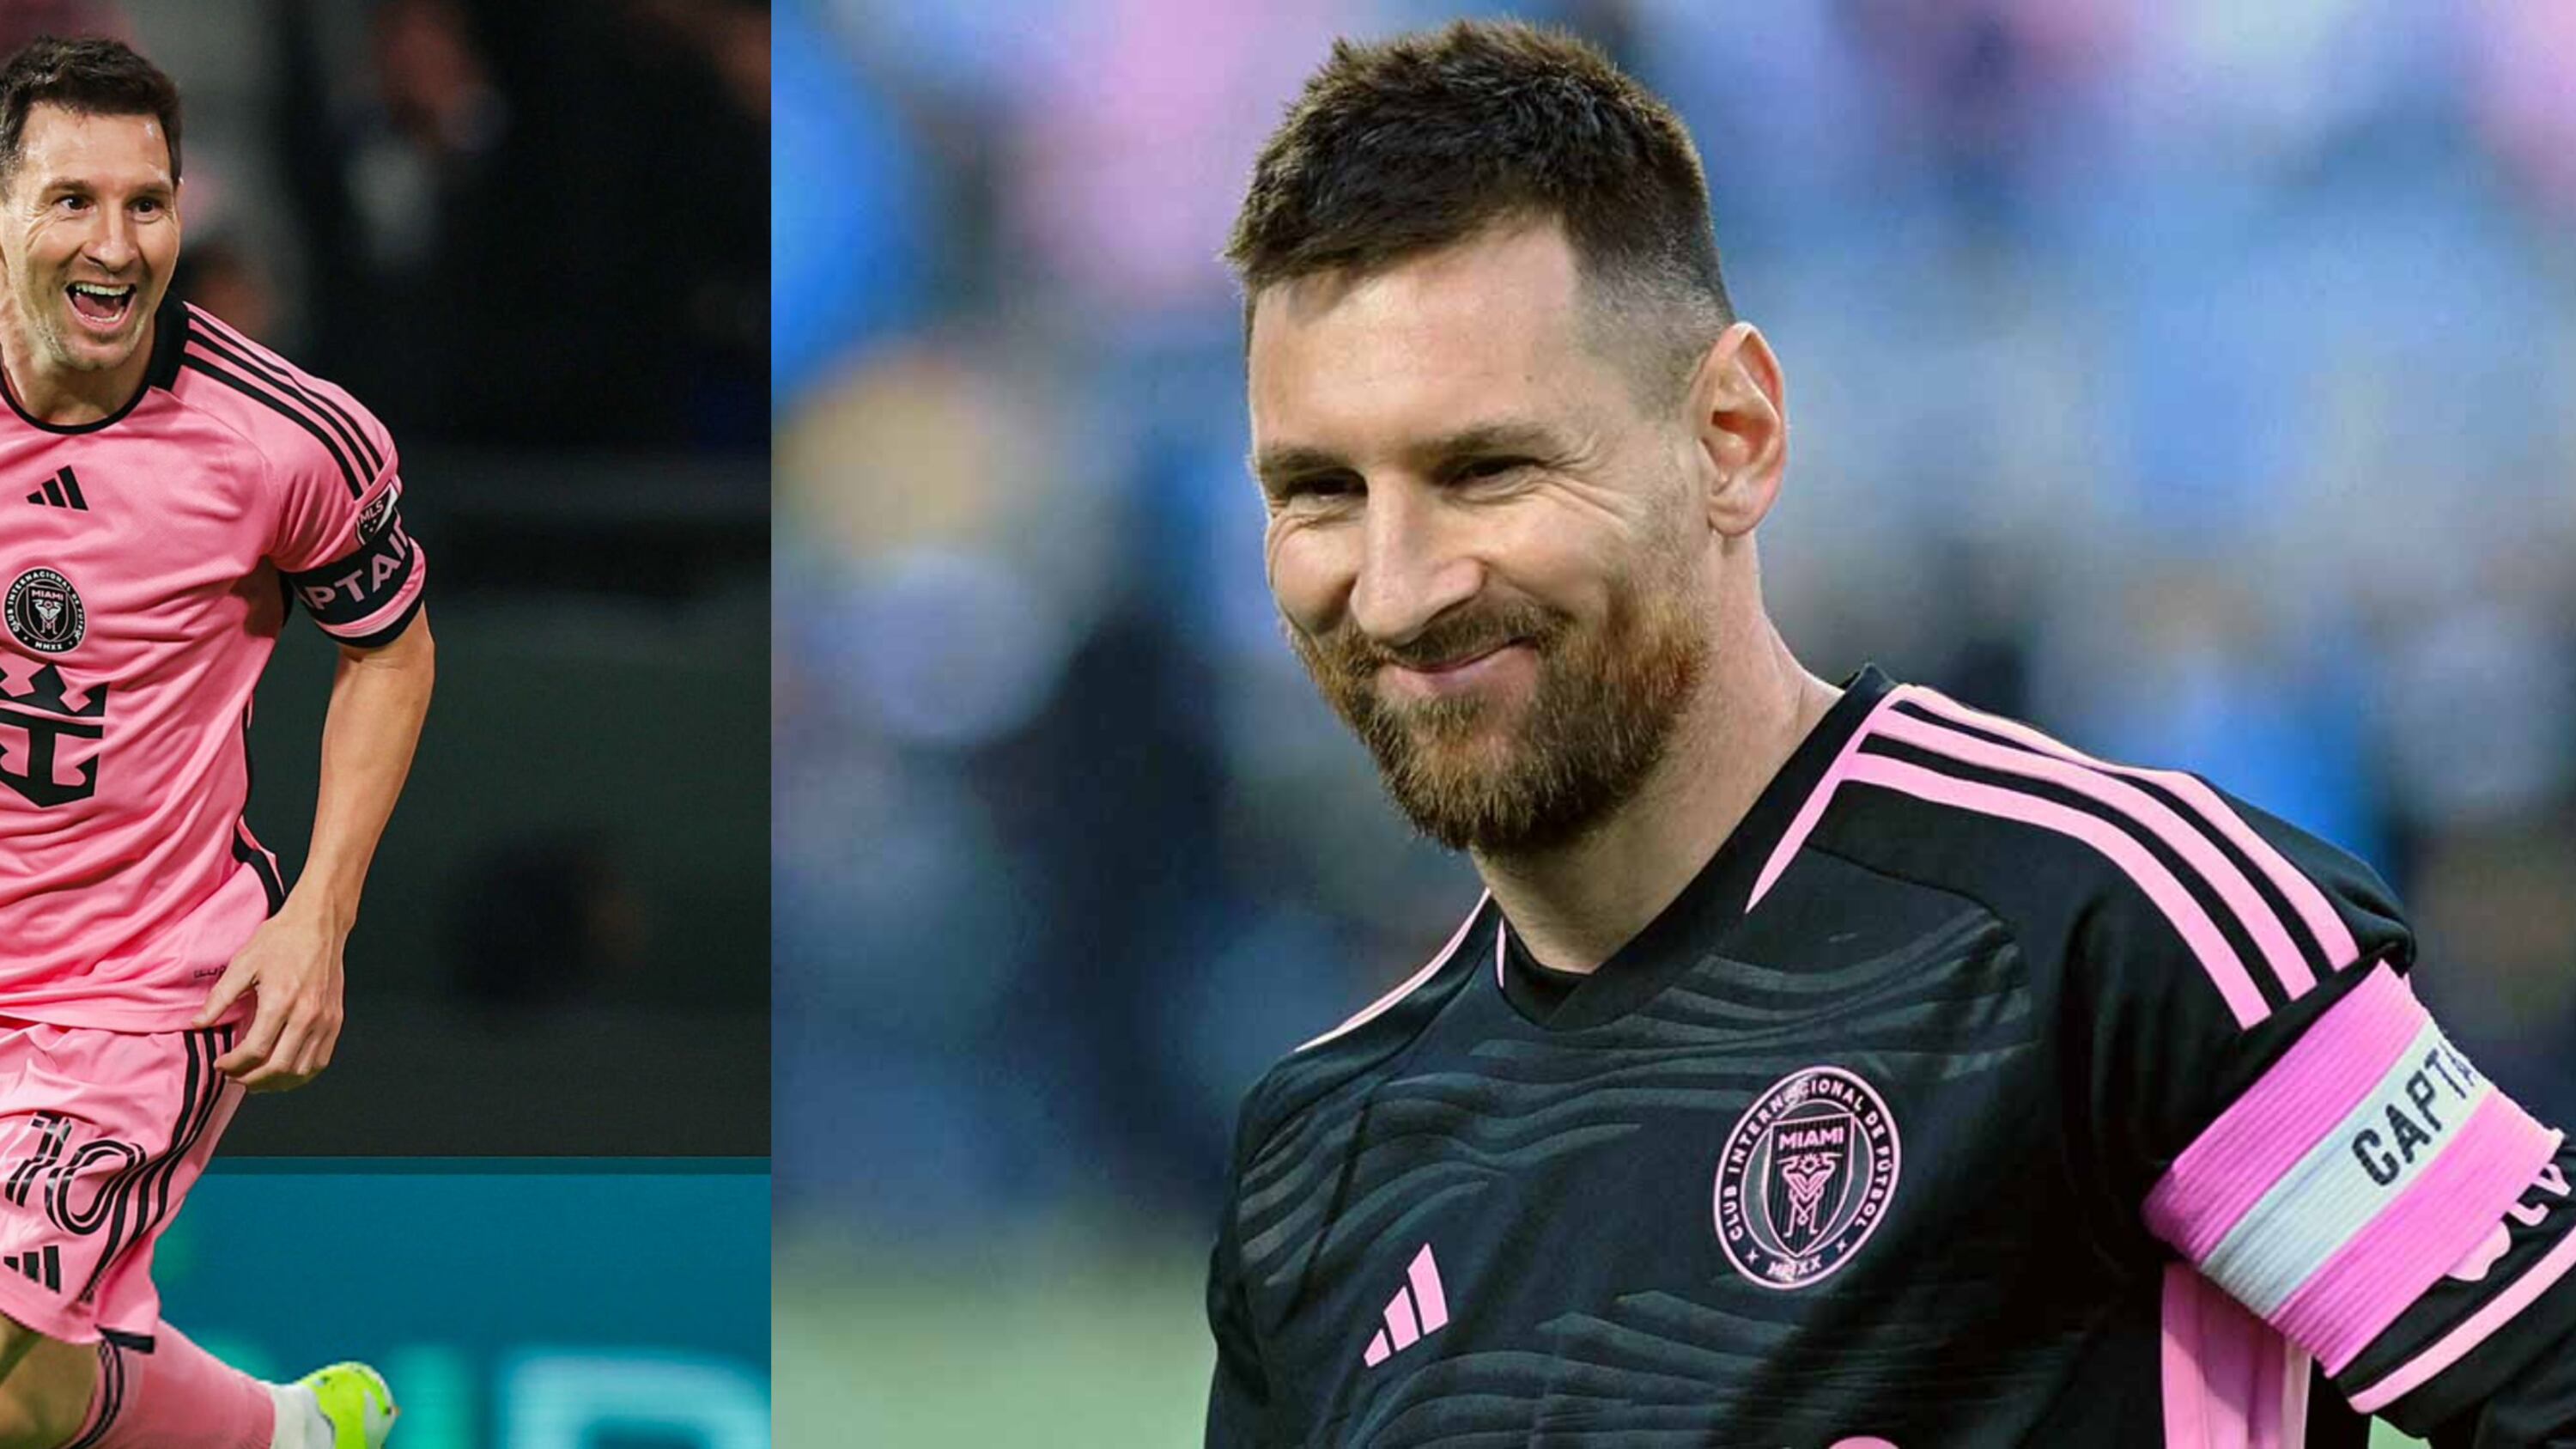 Lionel Messi effect, the star who arrived to Inter Miami only because of Lionel